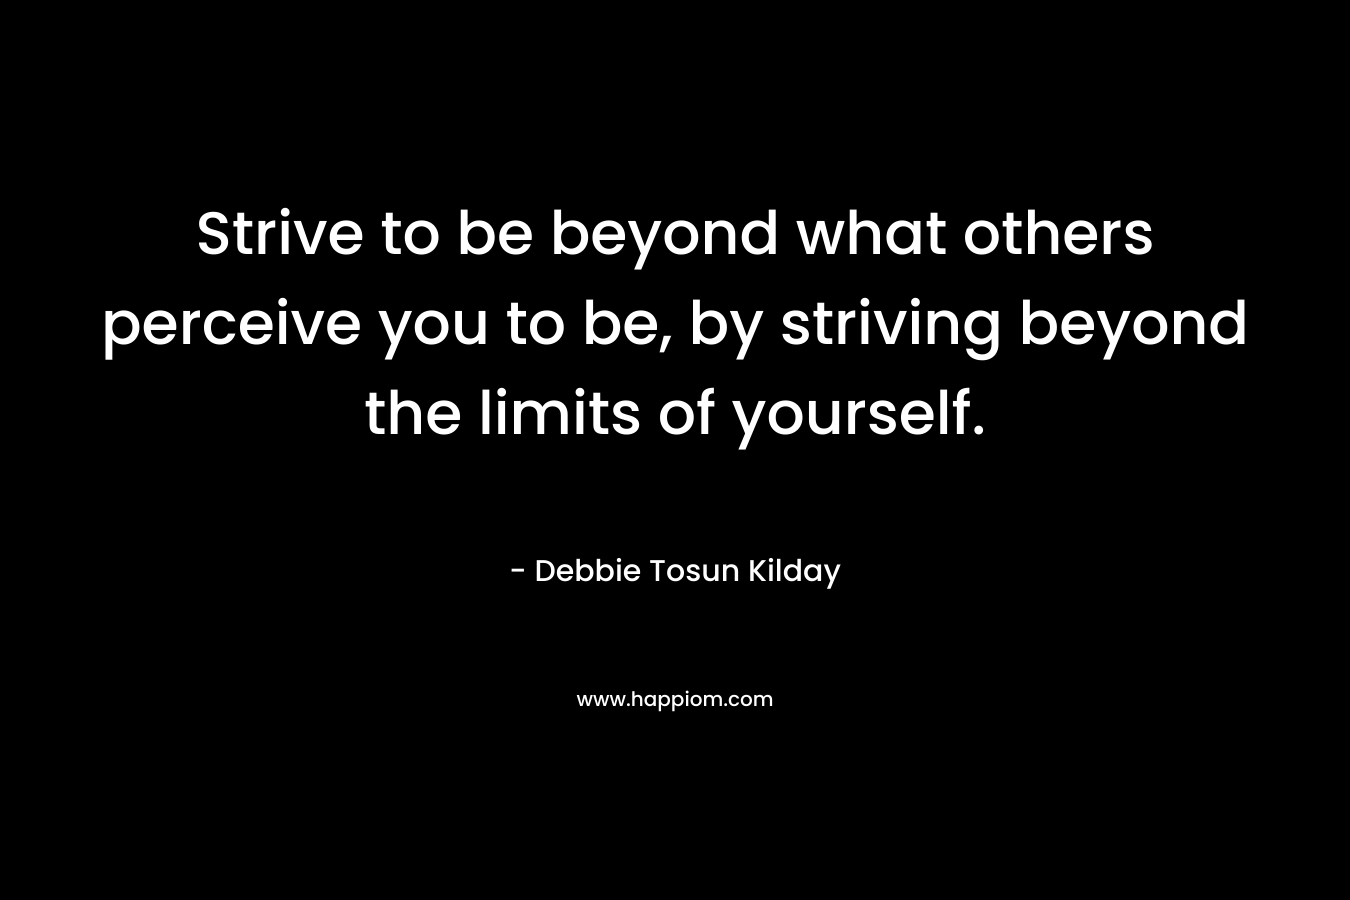 Strive to be beyond what others perceive you to be, by striving beyond the limits of yourself.